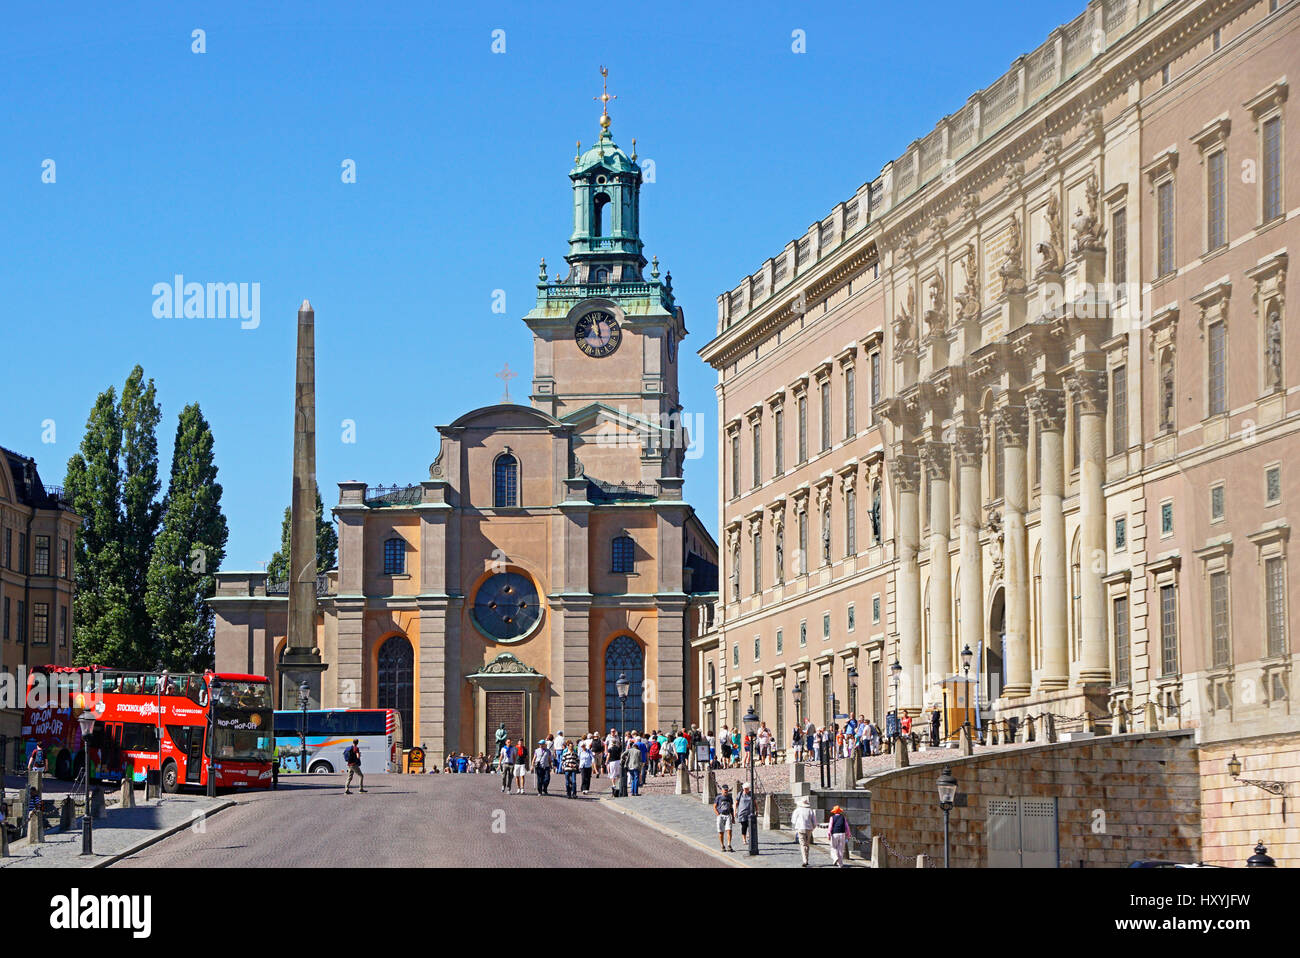 Gamla Stan (Old Town) clock tower of Great Church (Storkyrkan) with The Royal Palace at right in Stockholm, Sweden. Stock Photo